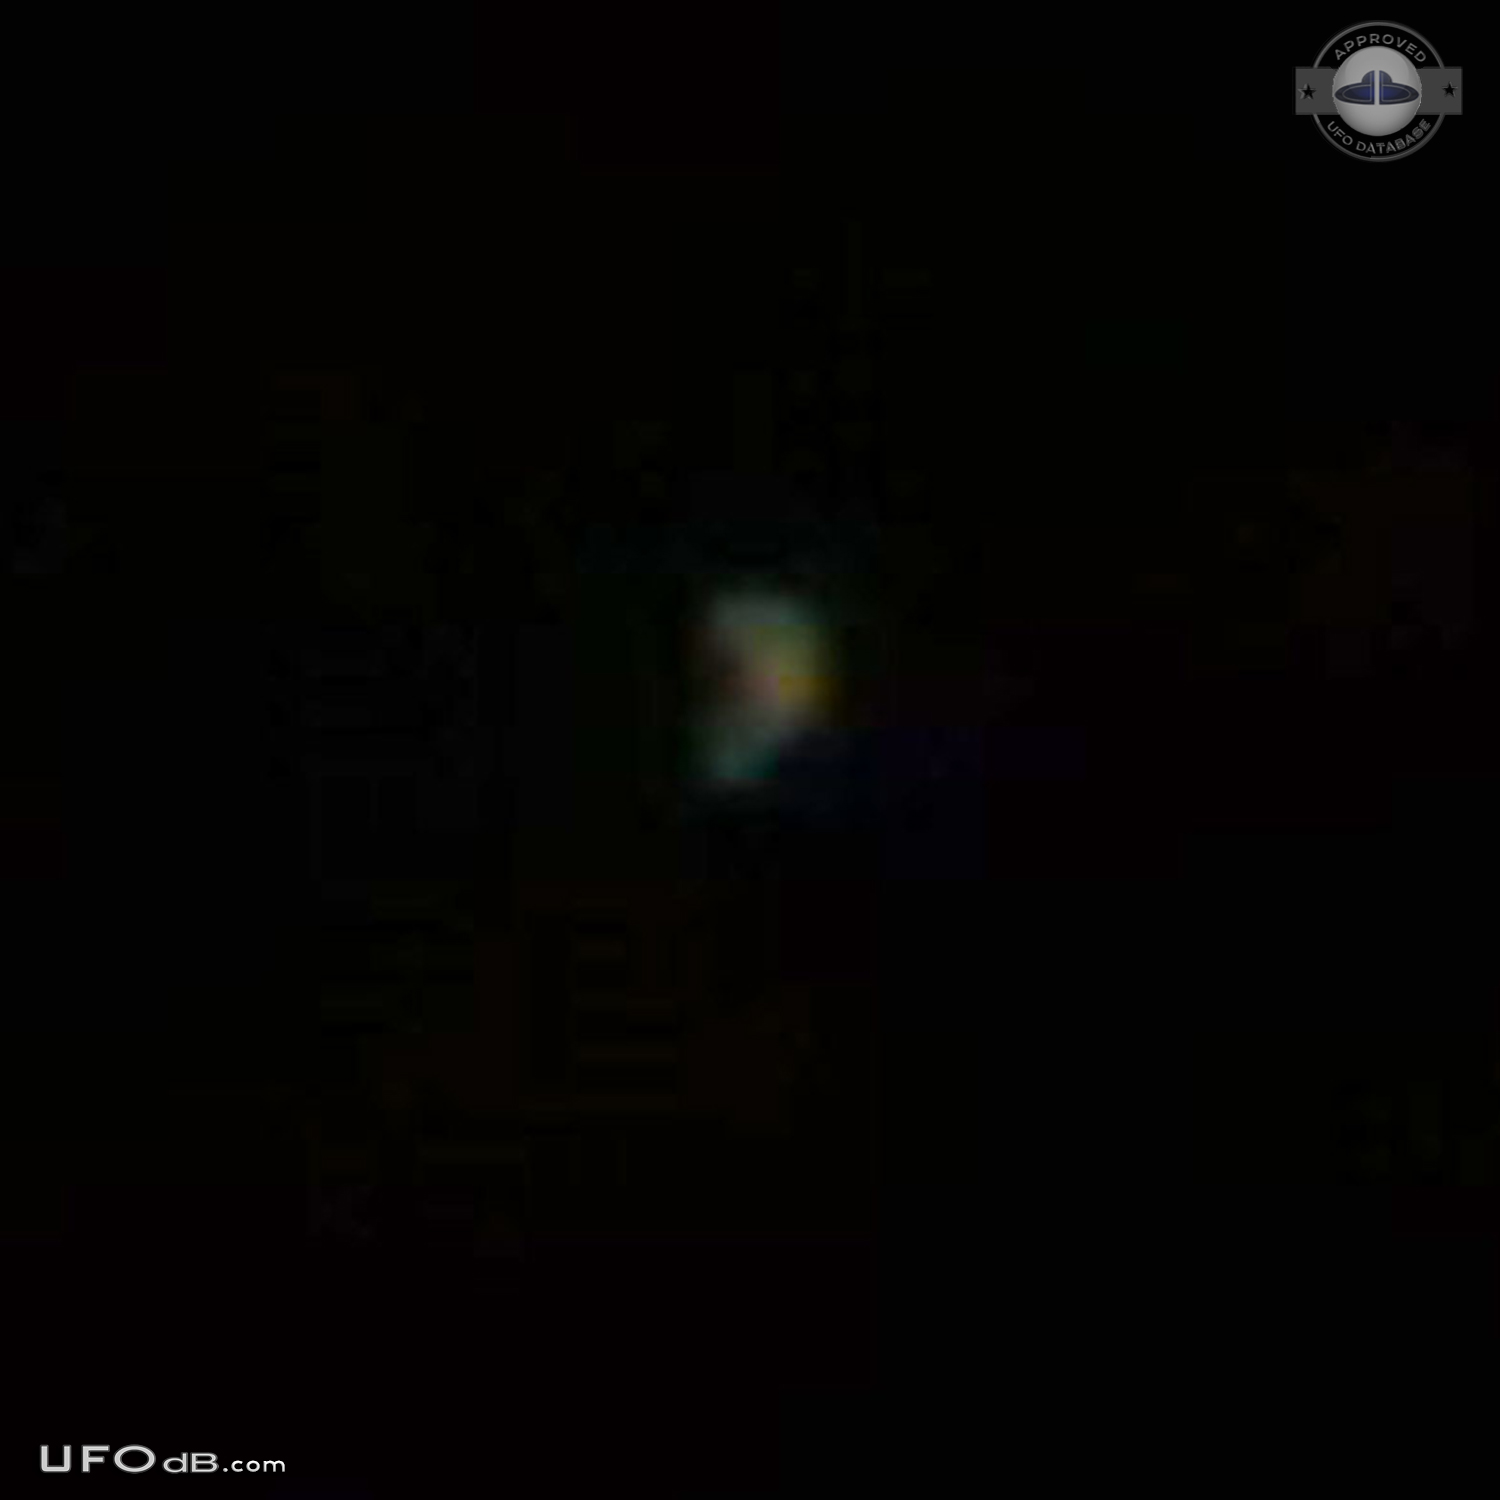 Incredible UFO sighting with pictures & details - Troyan Bulgaria 2010 UFO Picture #464-8